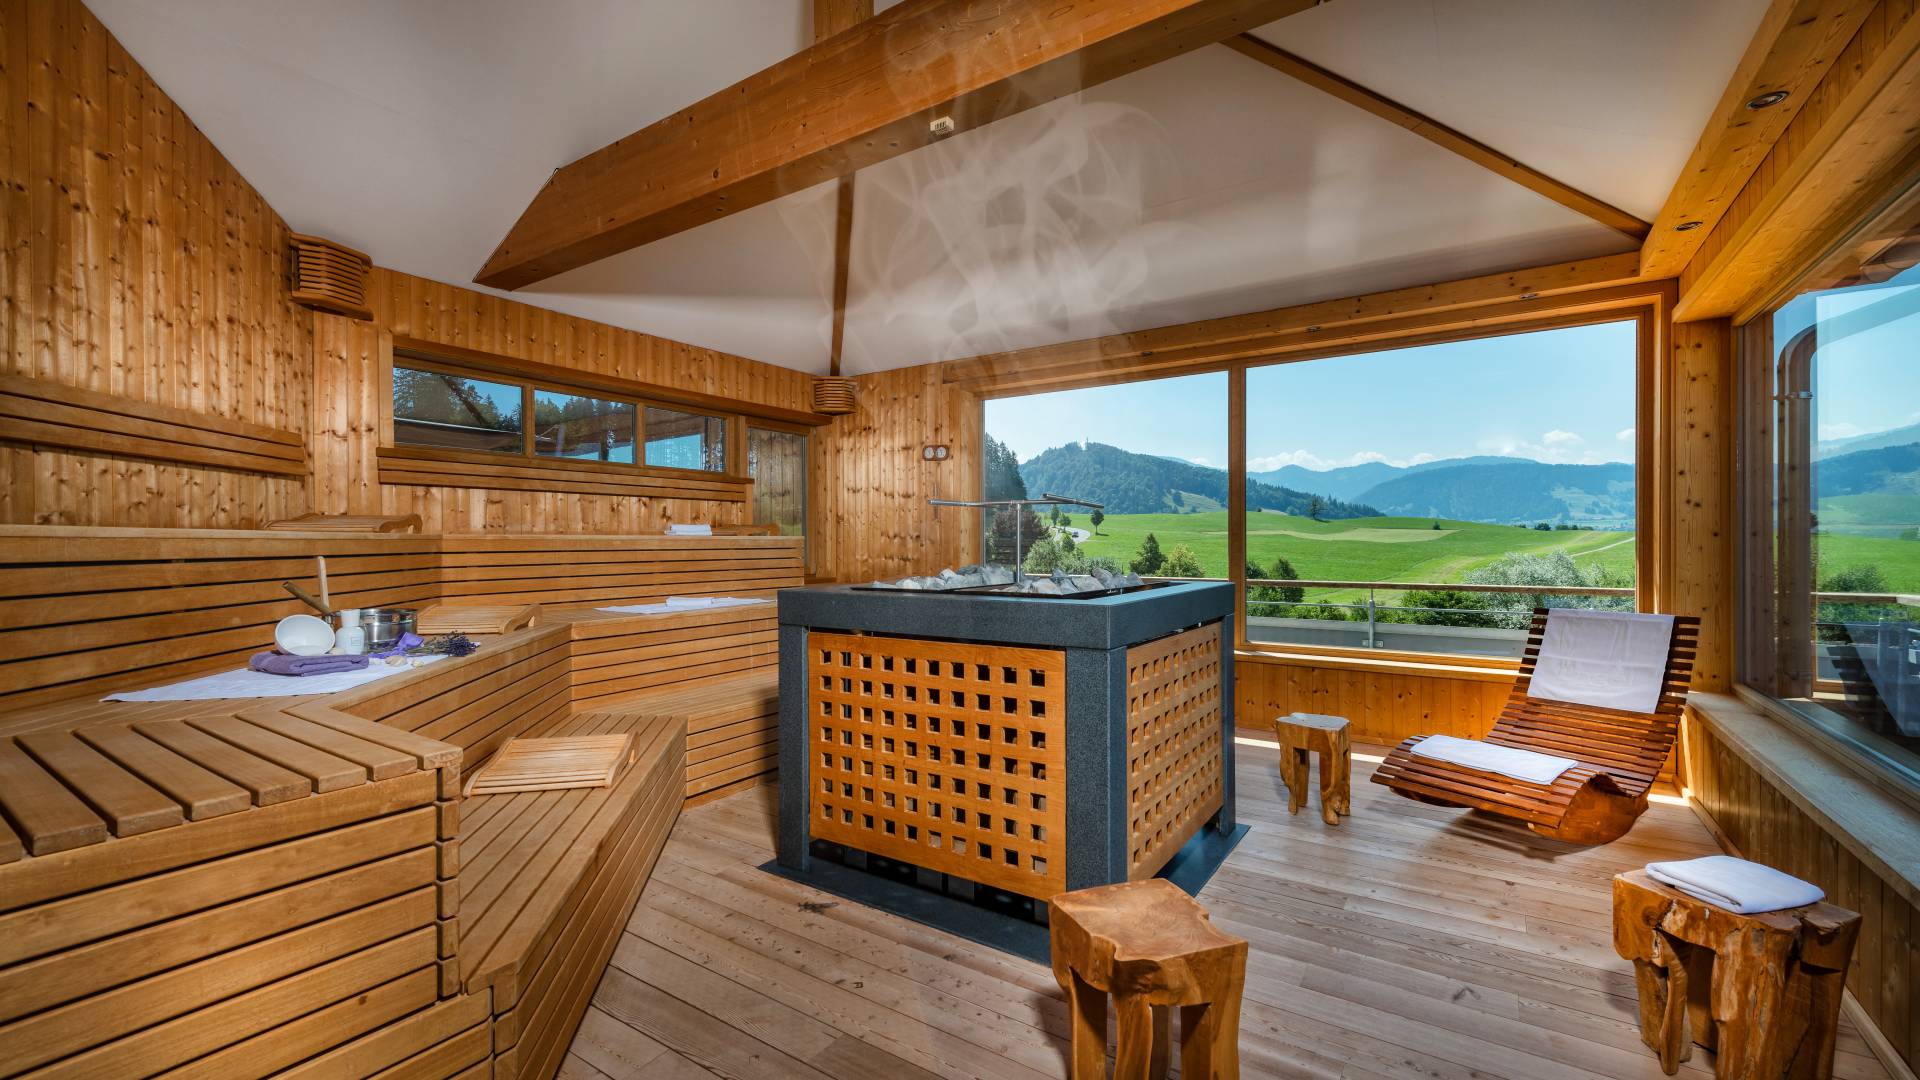 Panorama sauna with breathtaking moutain views